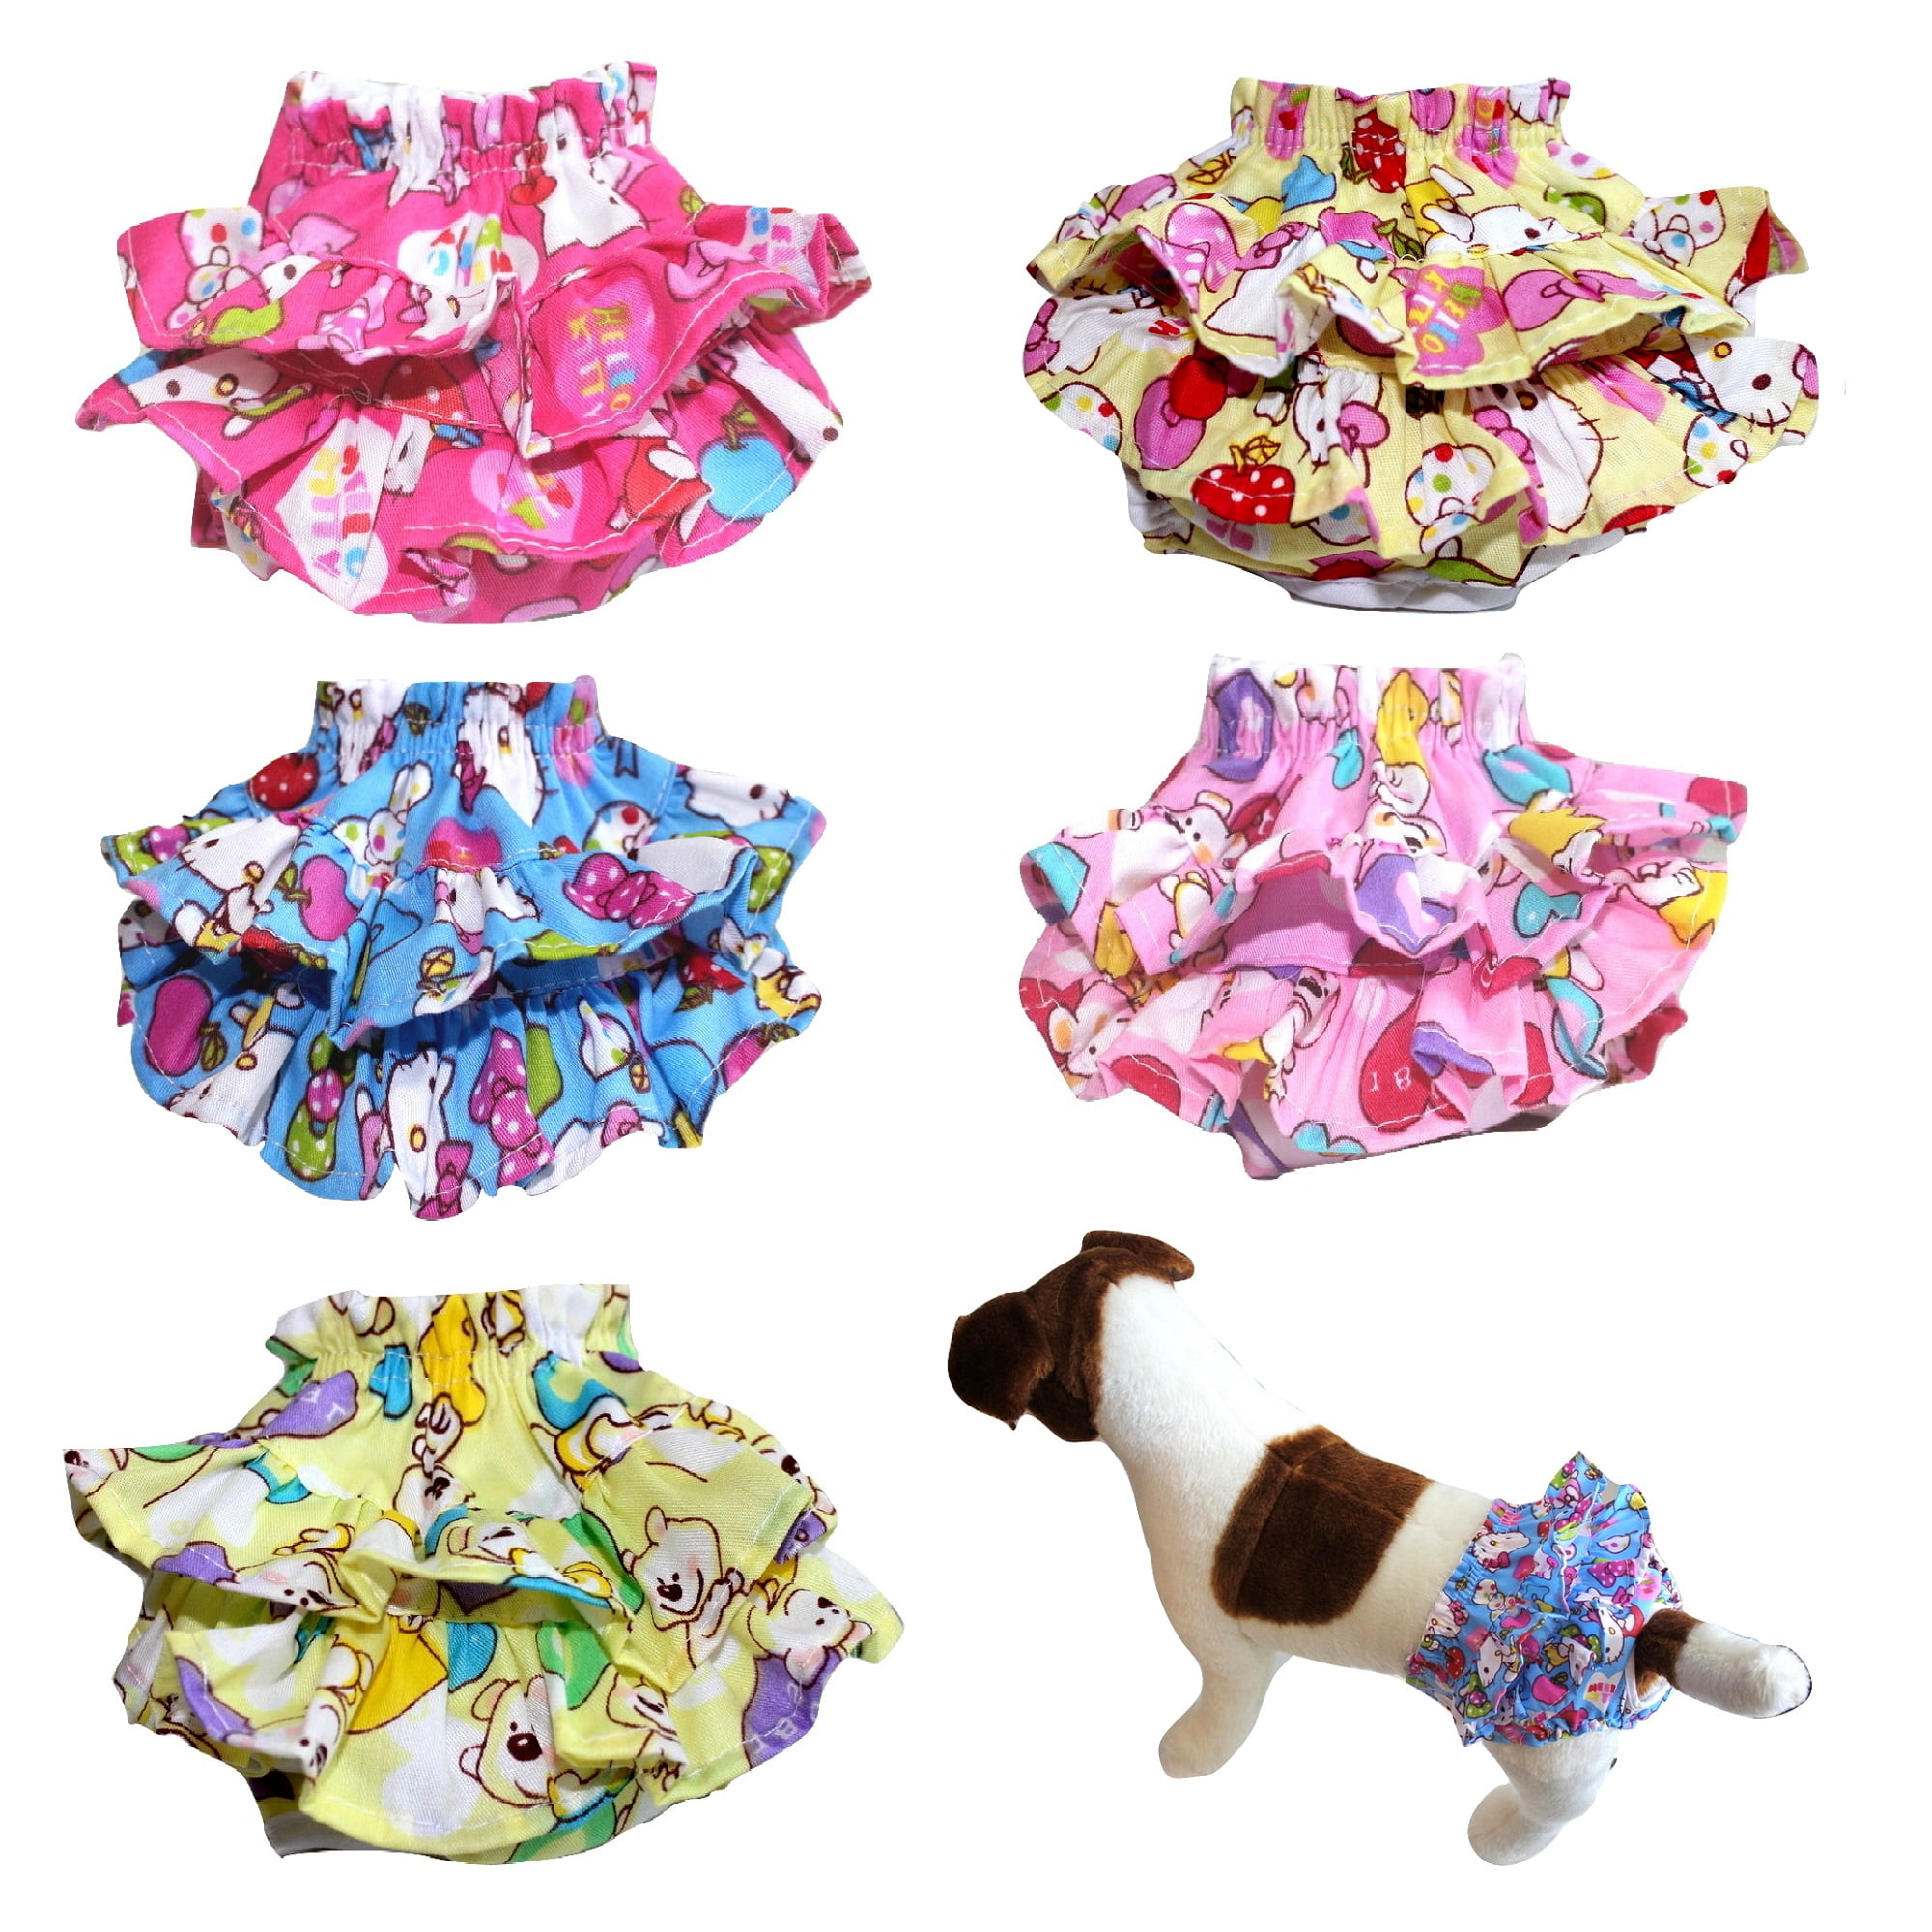 Pet Gift Female Dog Diaper Male Dog Diaper Reusable Dog Diaper Plaid Dog Accessories Birthday Gifts For Dog Dad Washable Dog Diapers